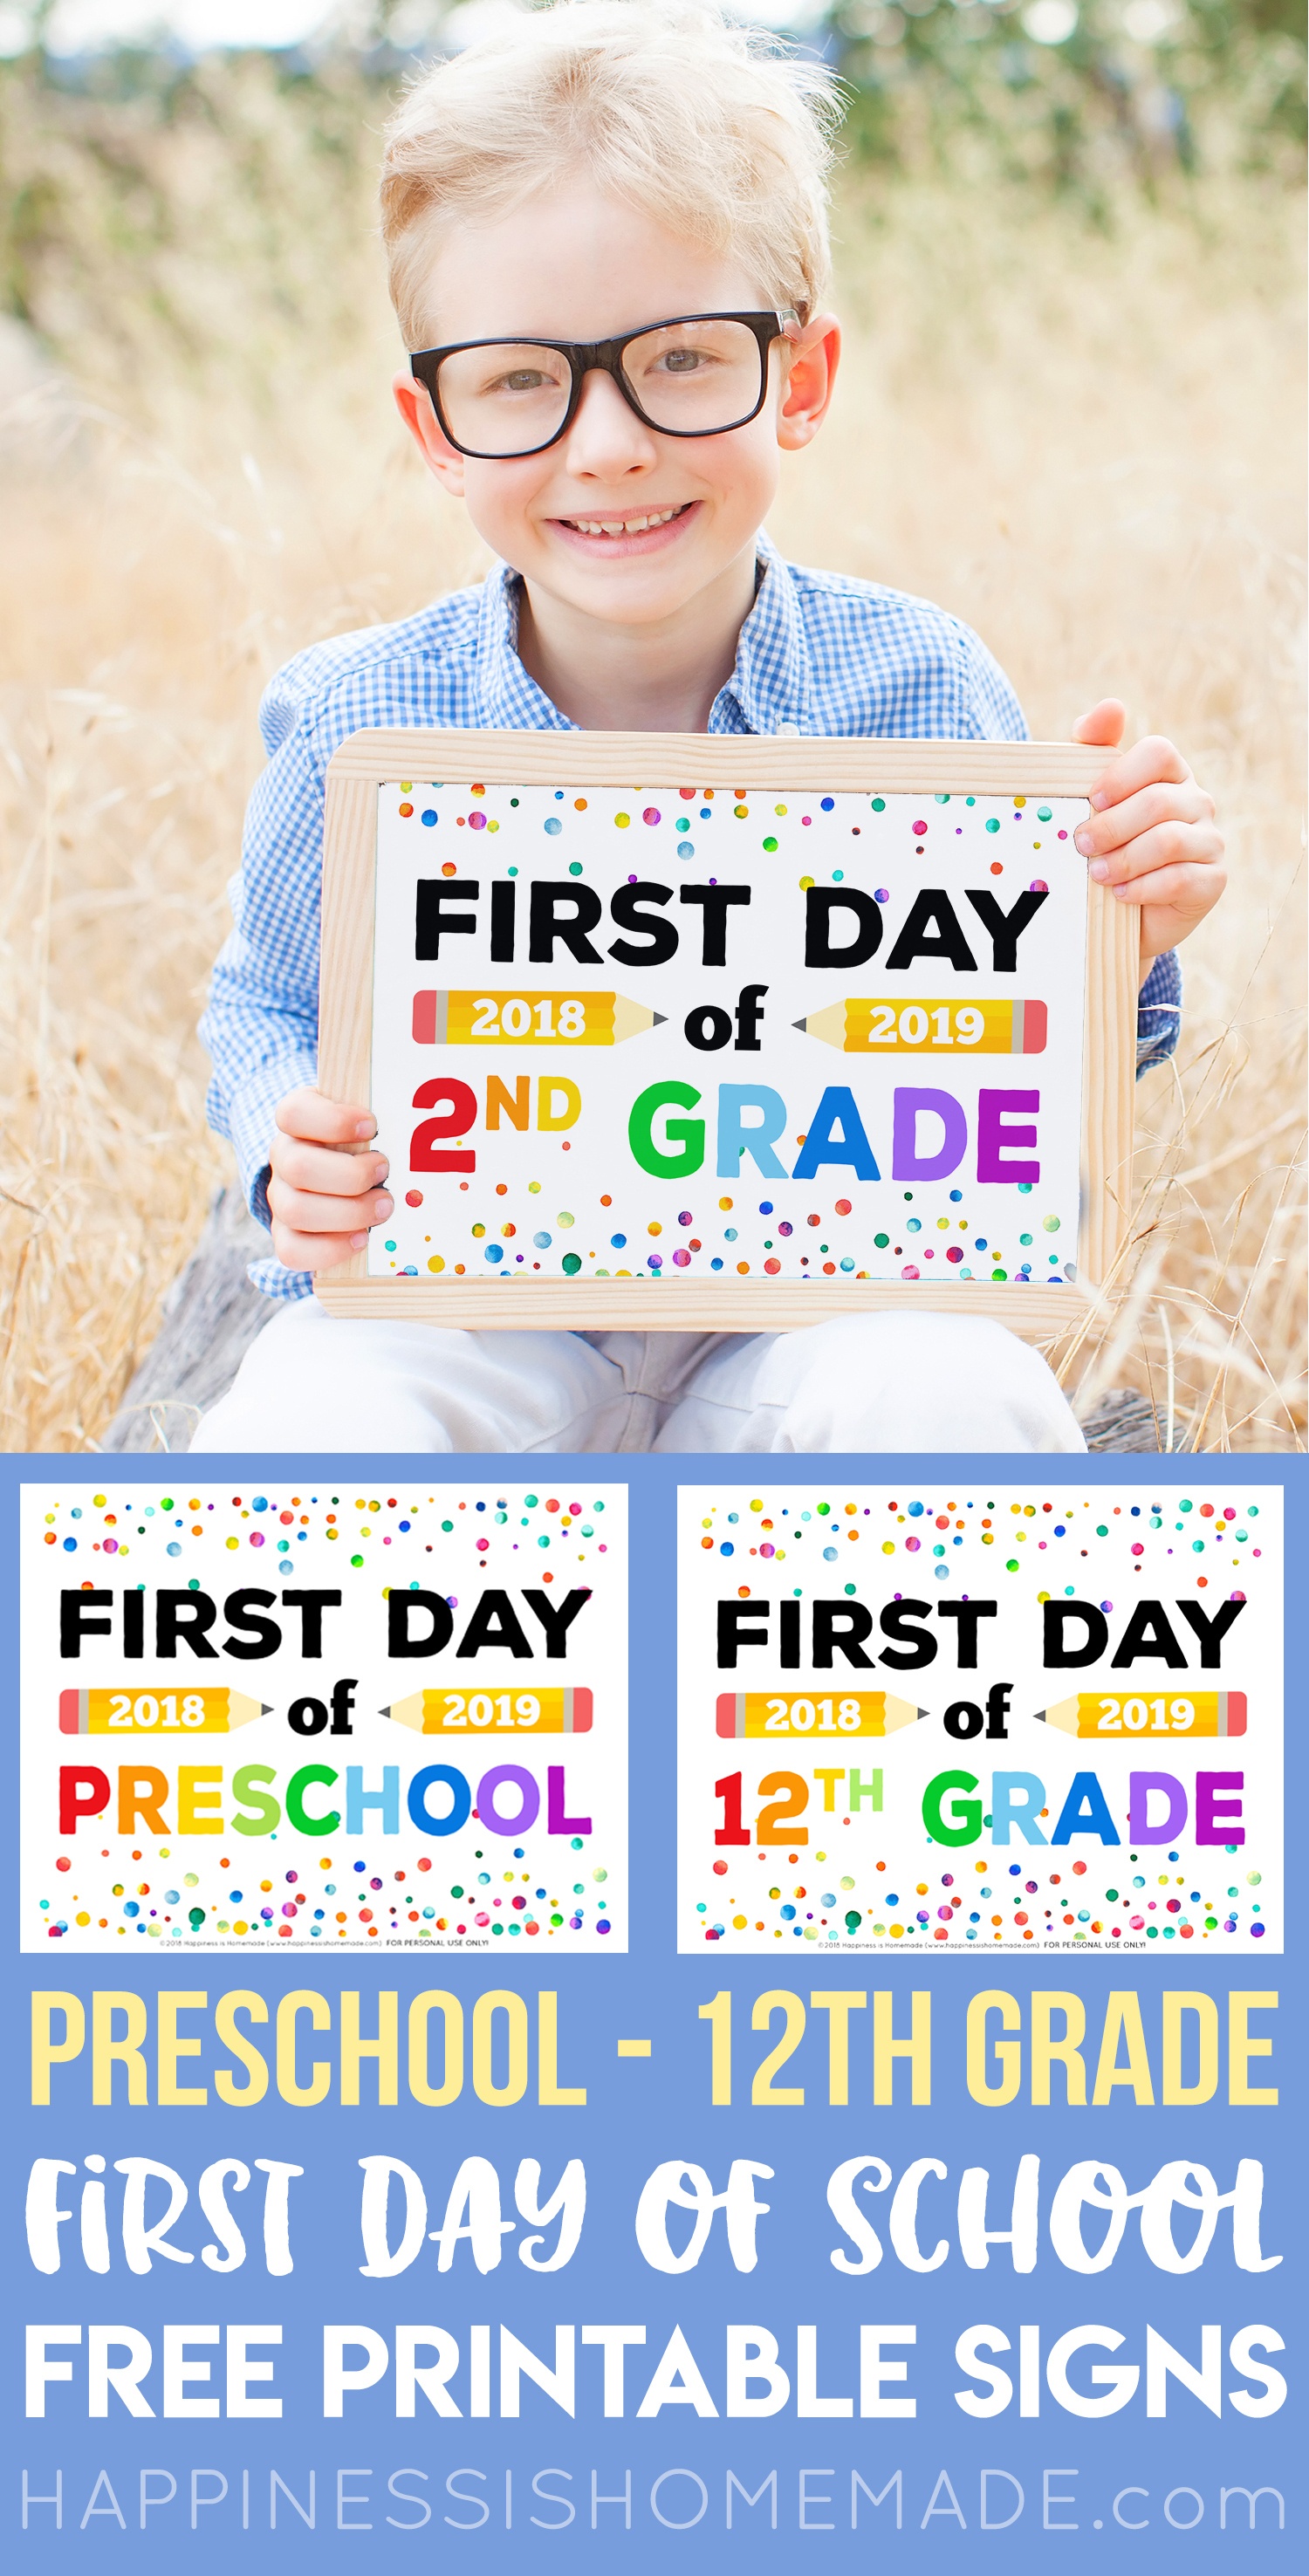 First Day Of School Signs - Free Printables - Happiness Is Homemade - Free Printable First Day Of Preschool Sign